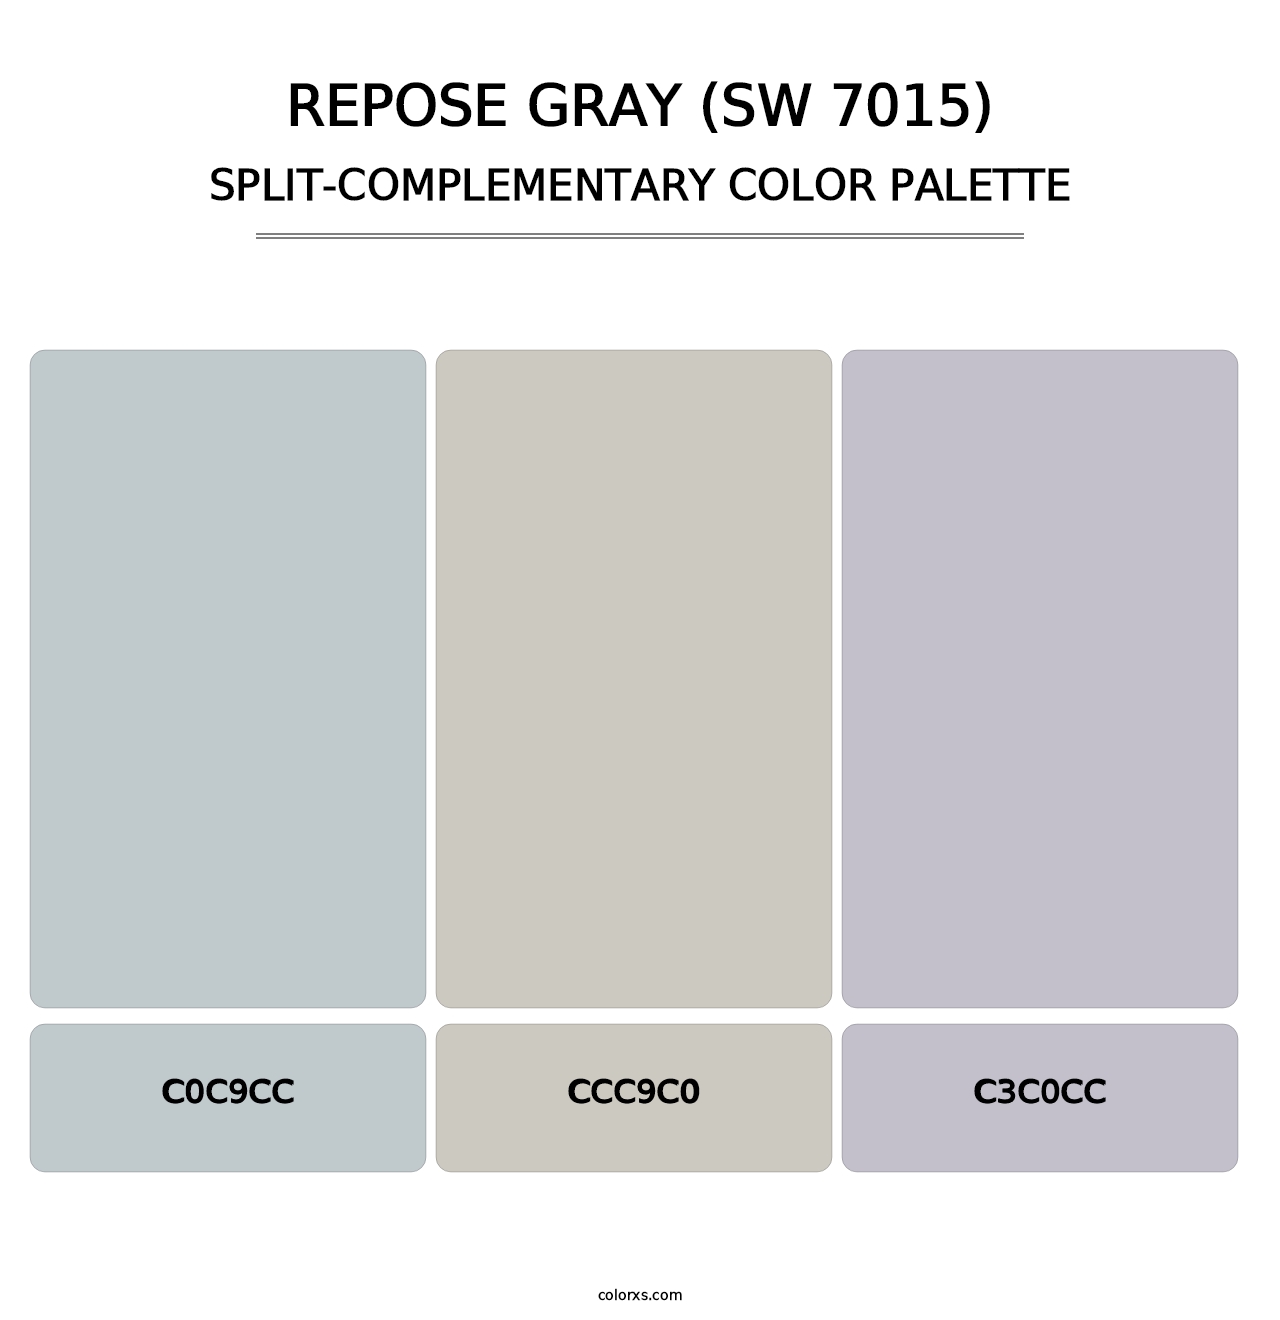 Repose Gray (SW 7015) - Split-Complementary Color Palette